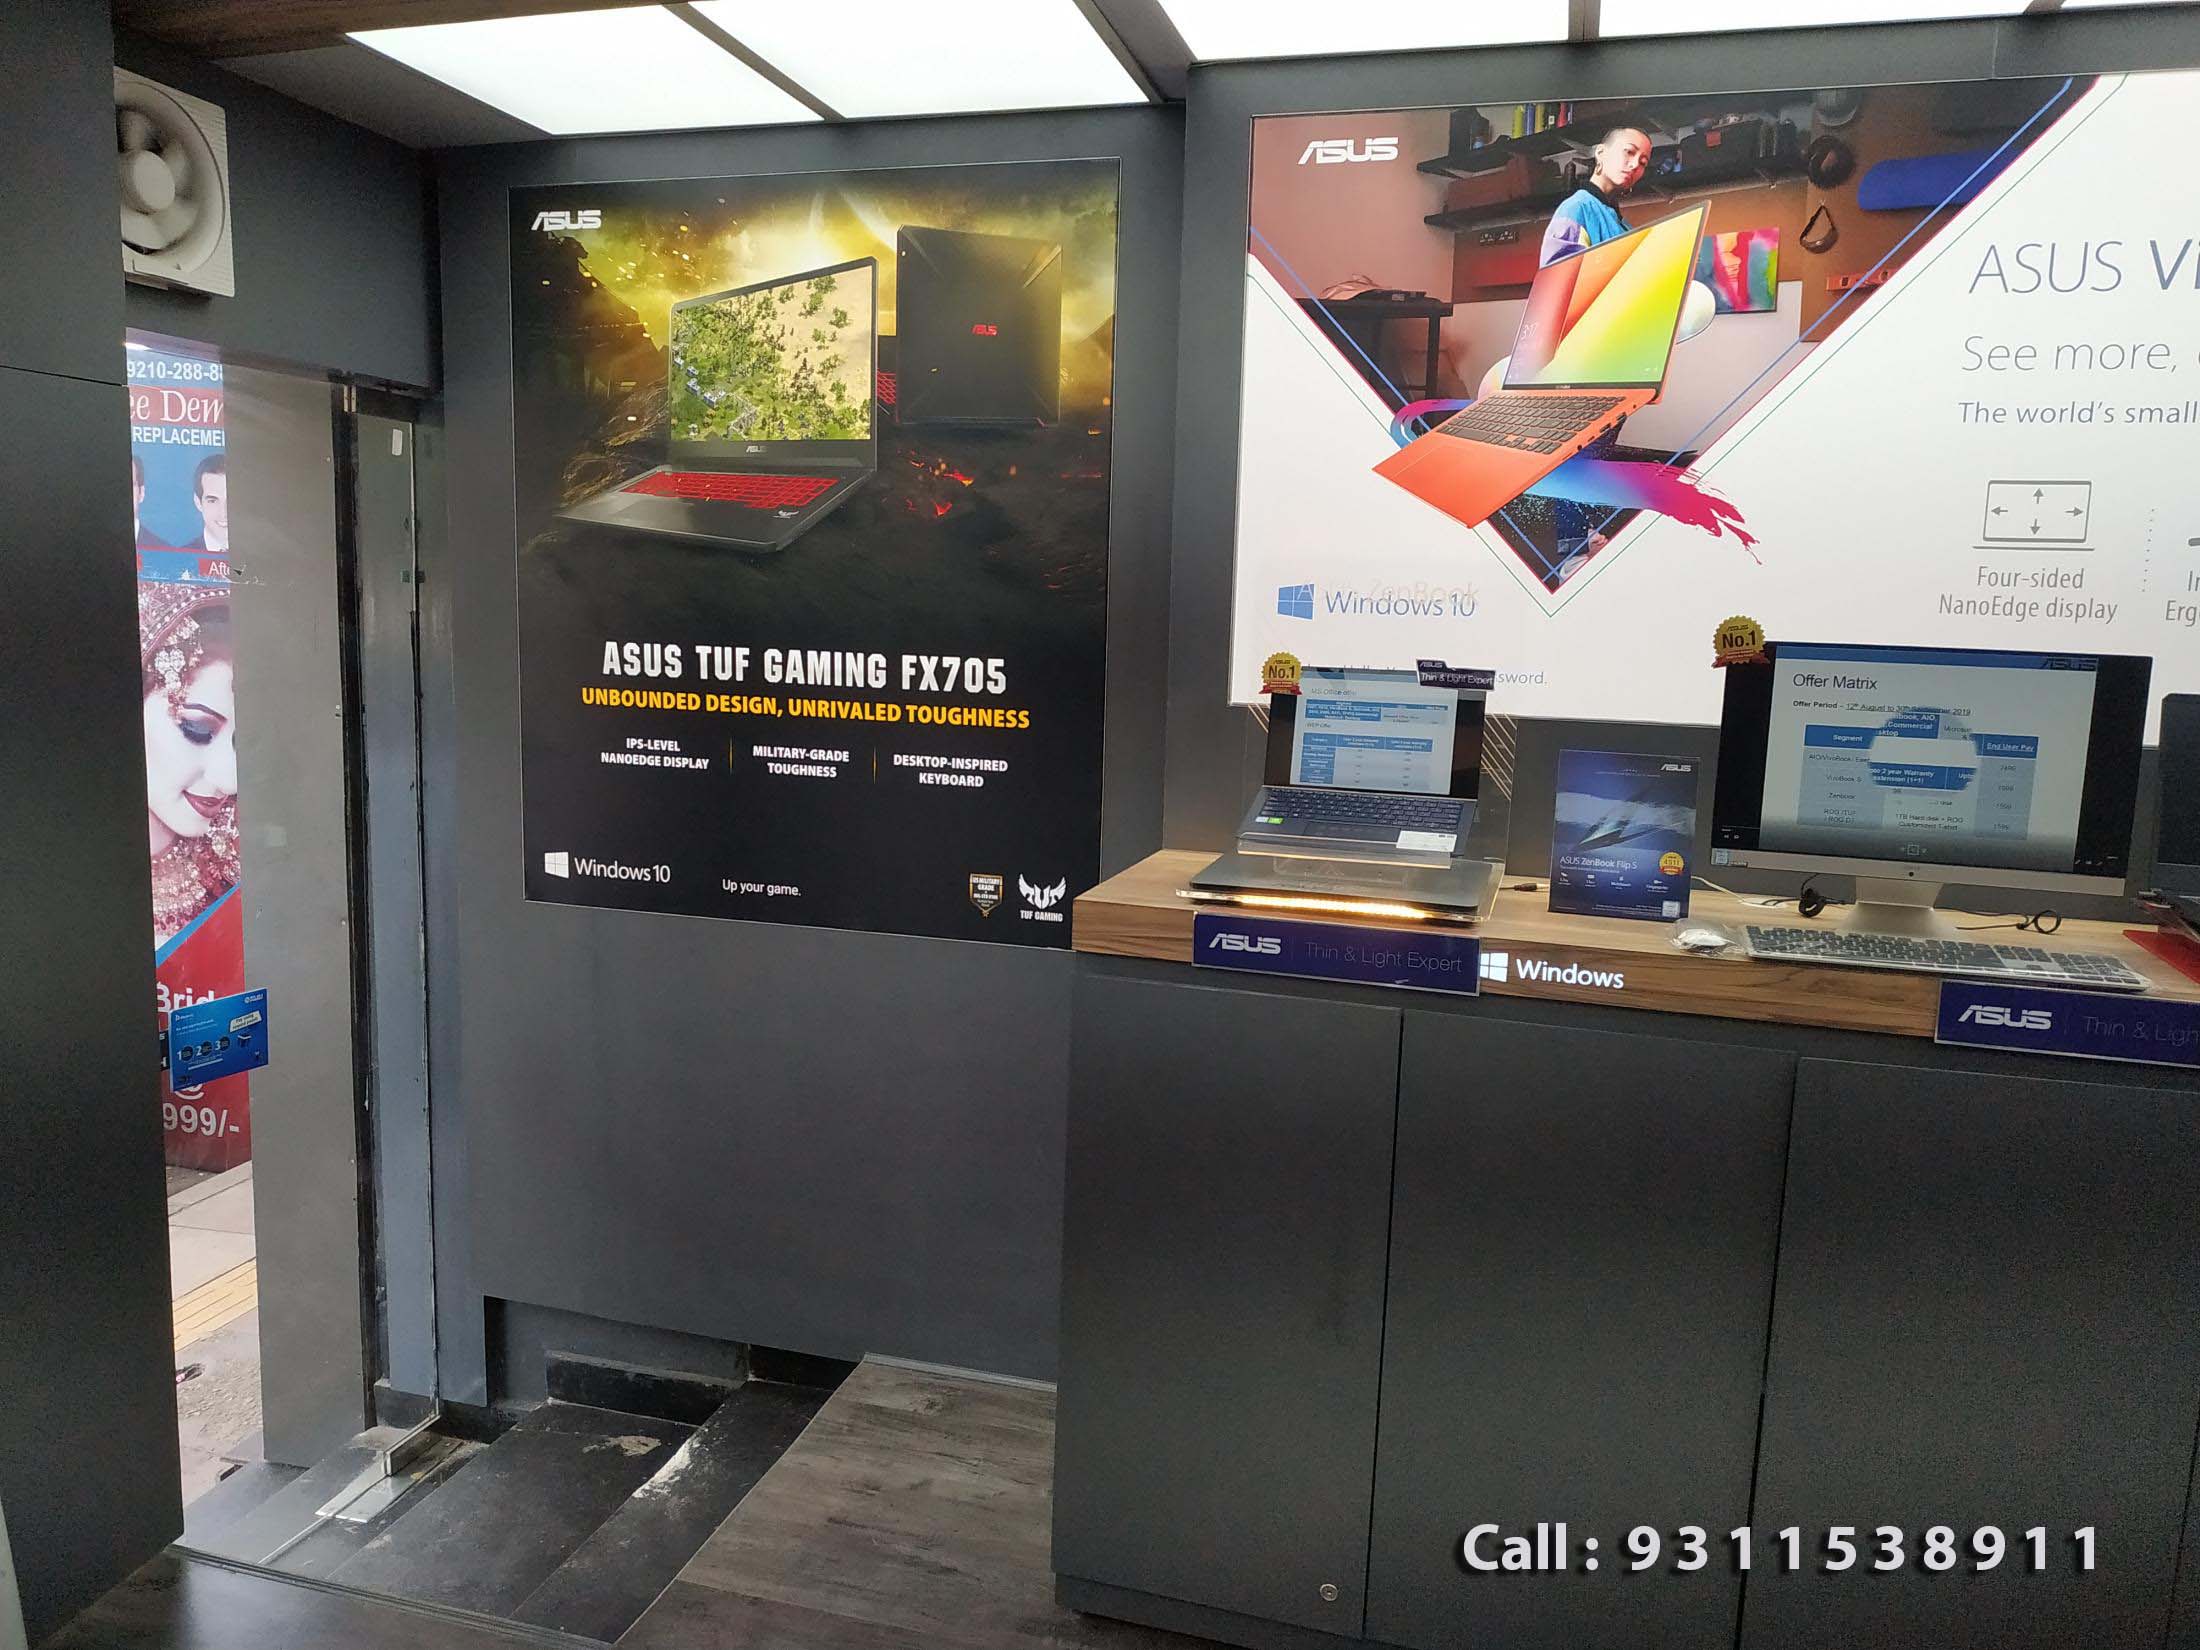 ASUS SERVICE CENTER IN LUCKNOW